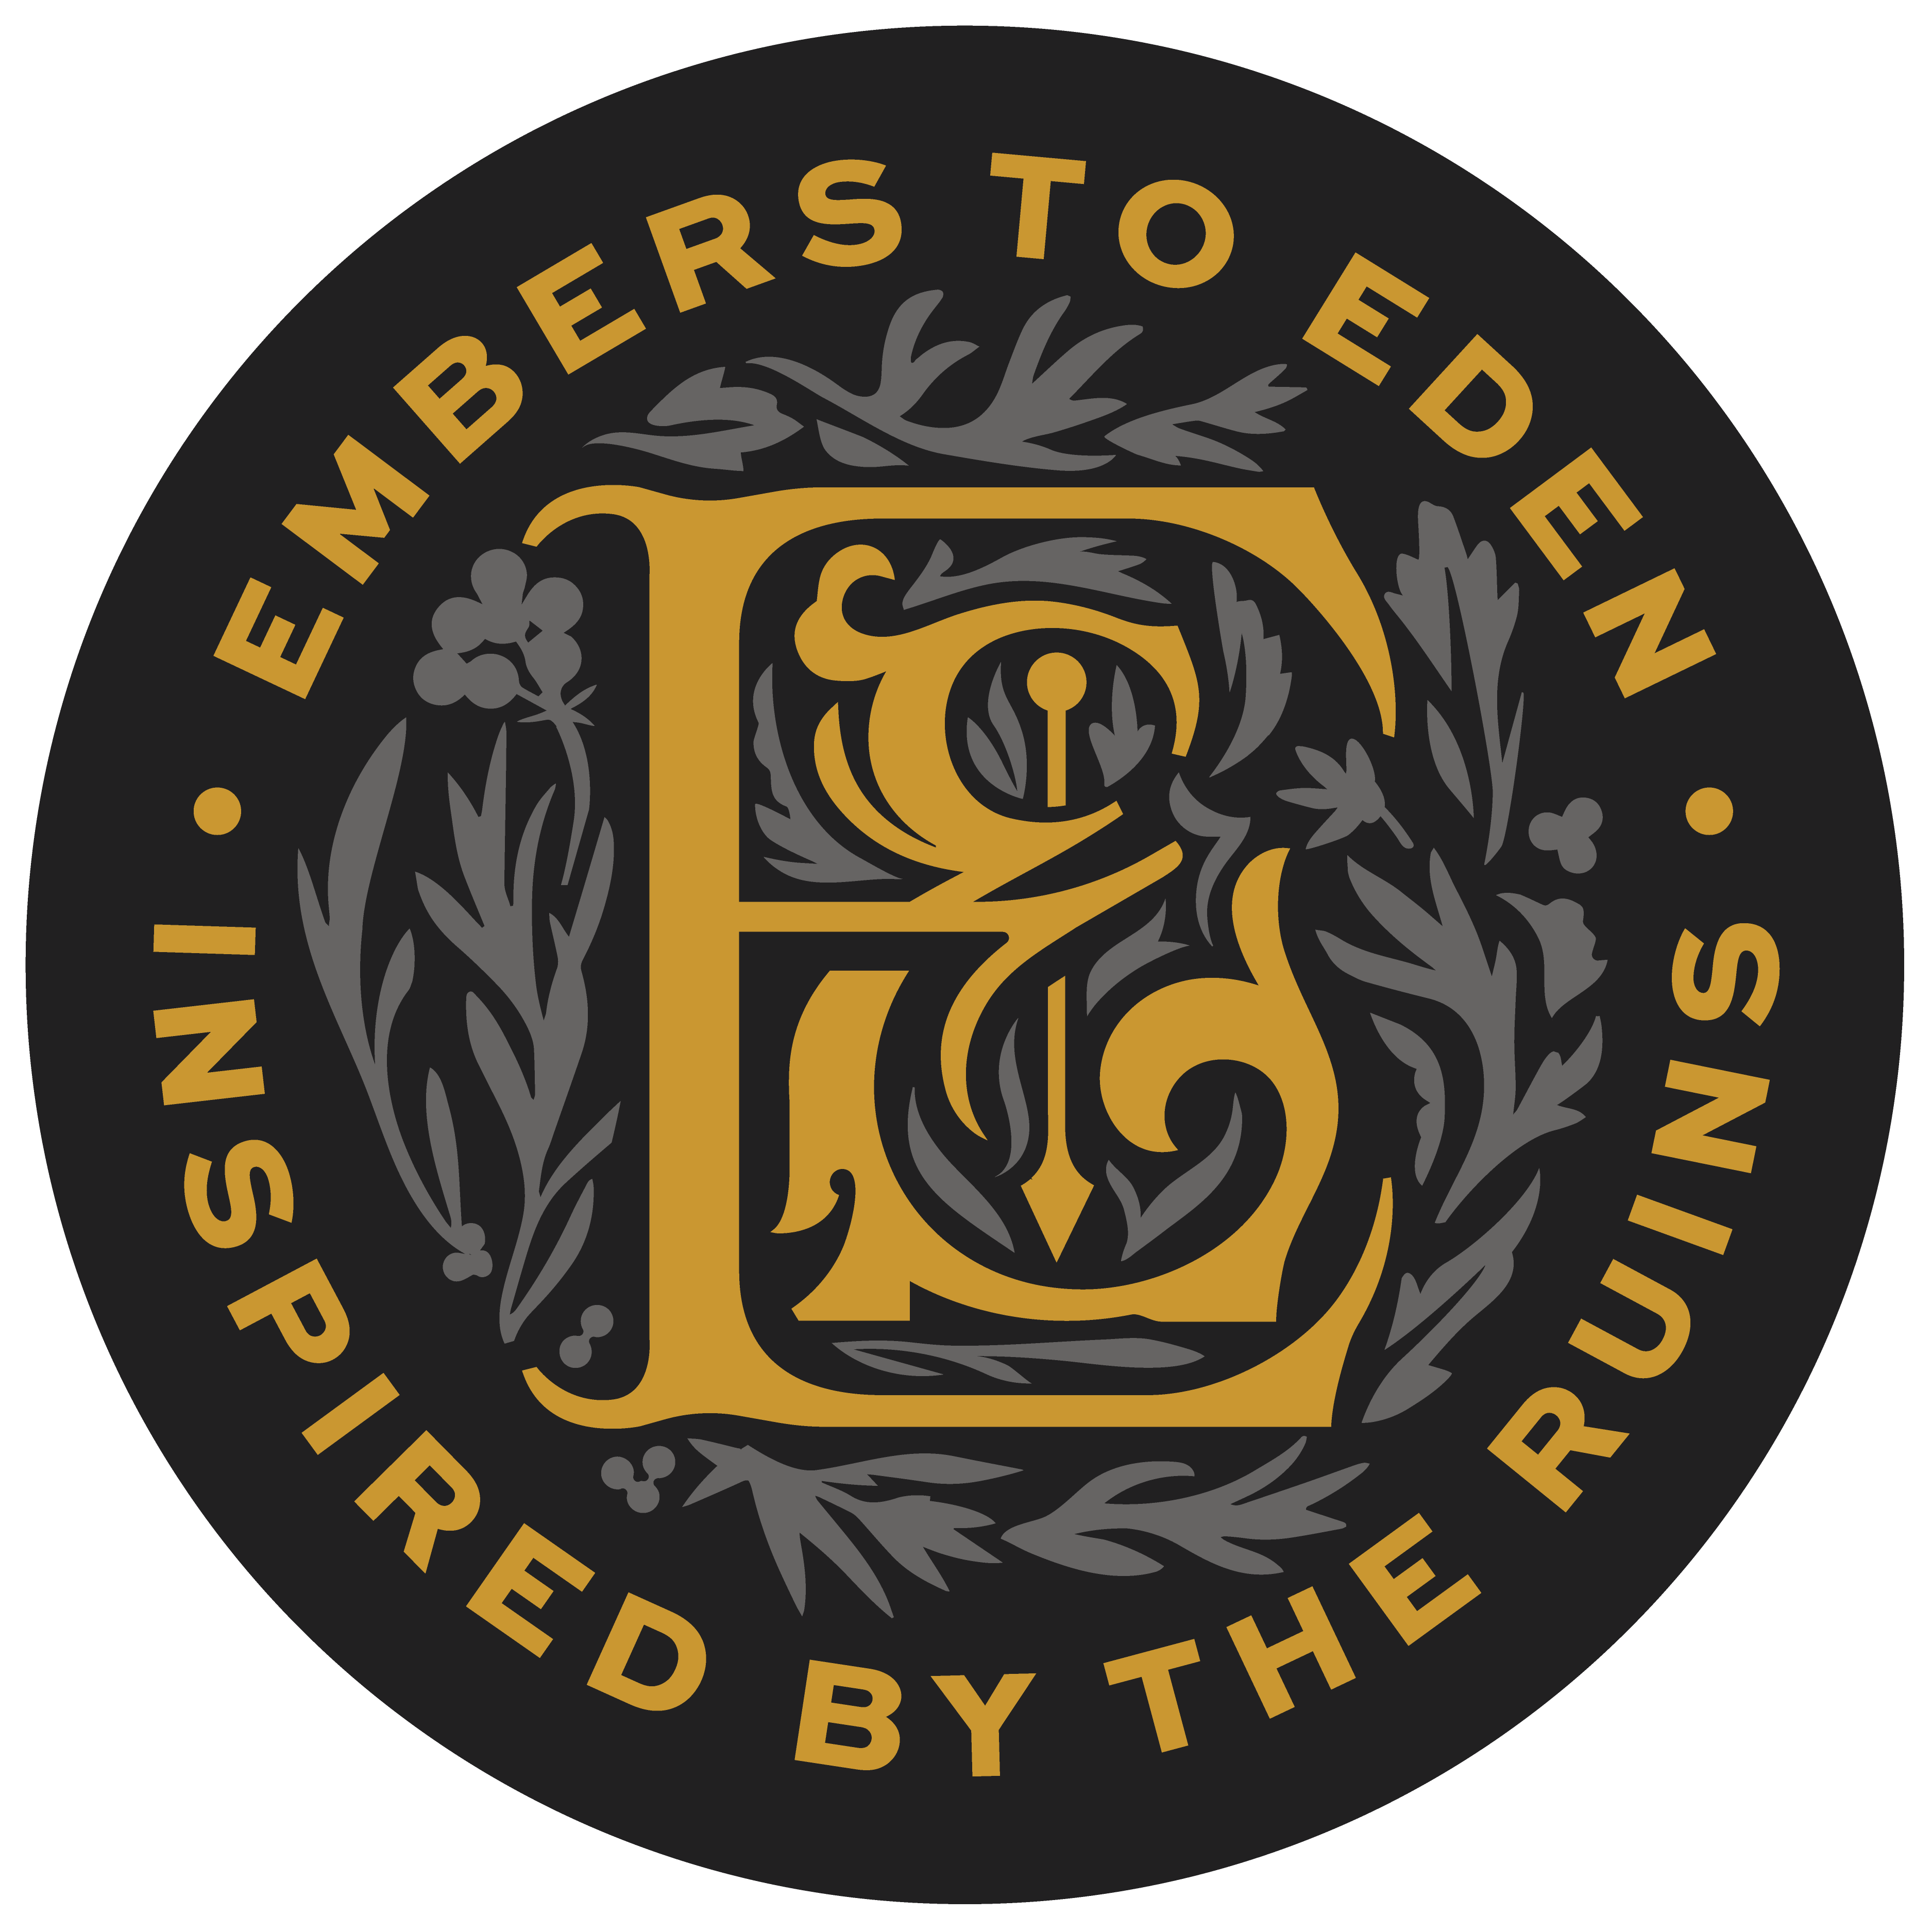 Embers to Eden logo design by logo designer Chad Michael Studio for your inspiration and for the worlds largest logo competition